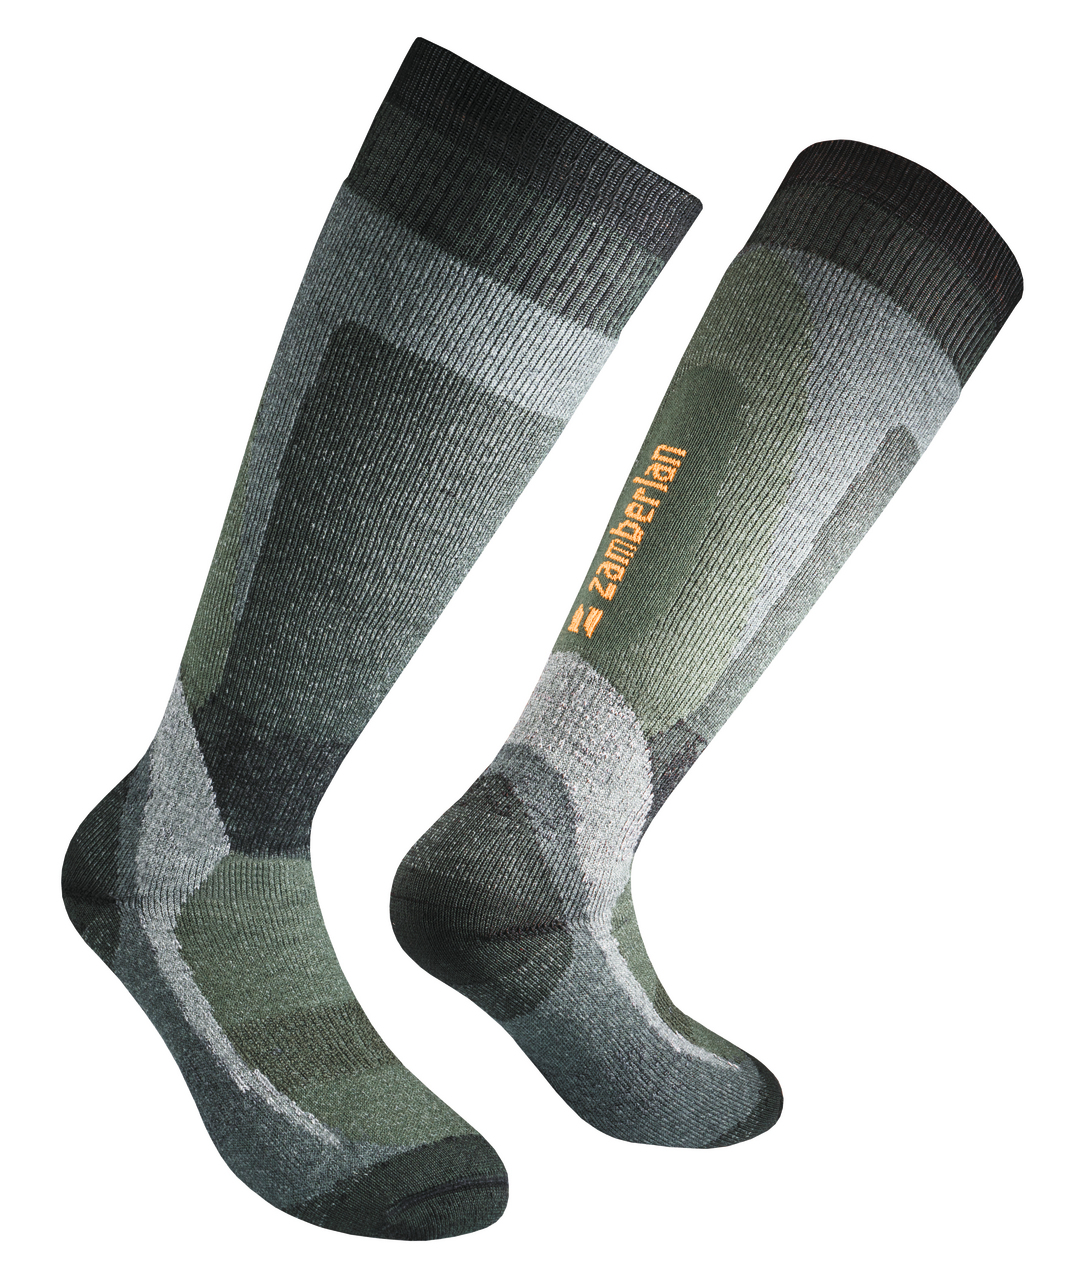 CHAUSSETTES THERMO FOREST HIGH 011 Green L Zamberlan